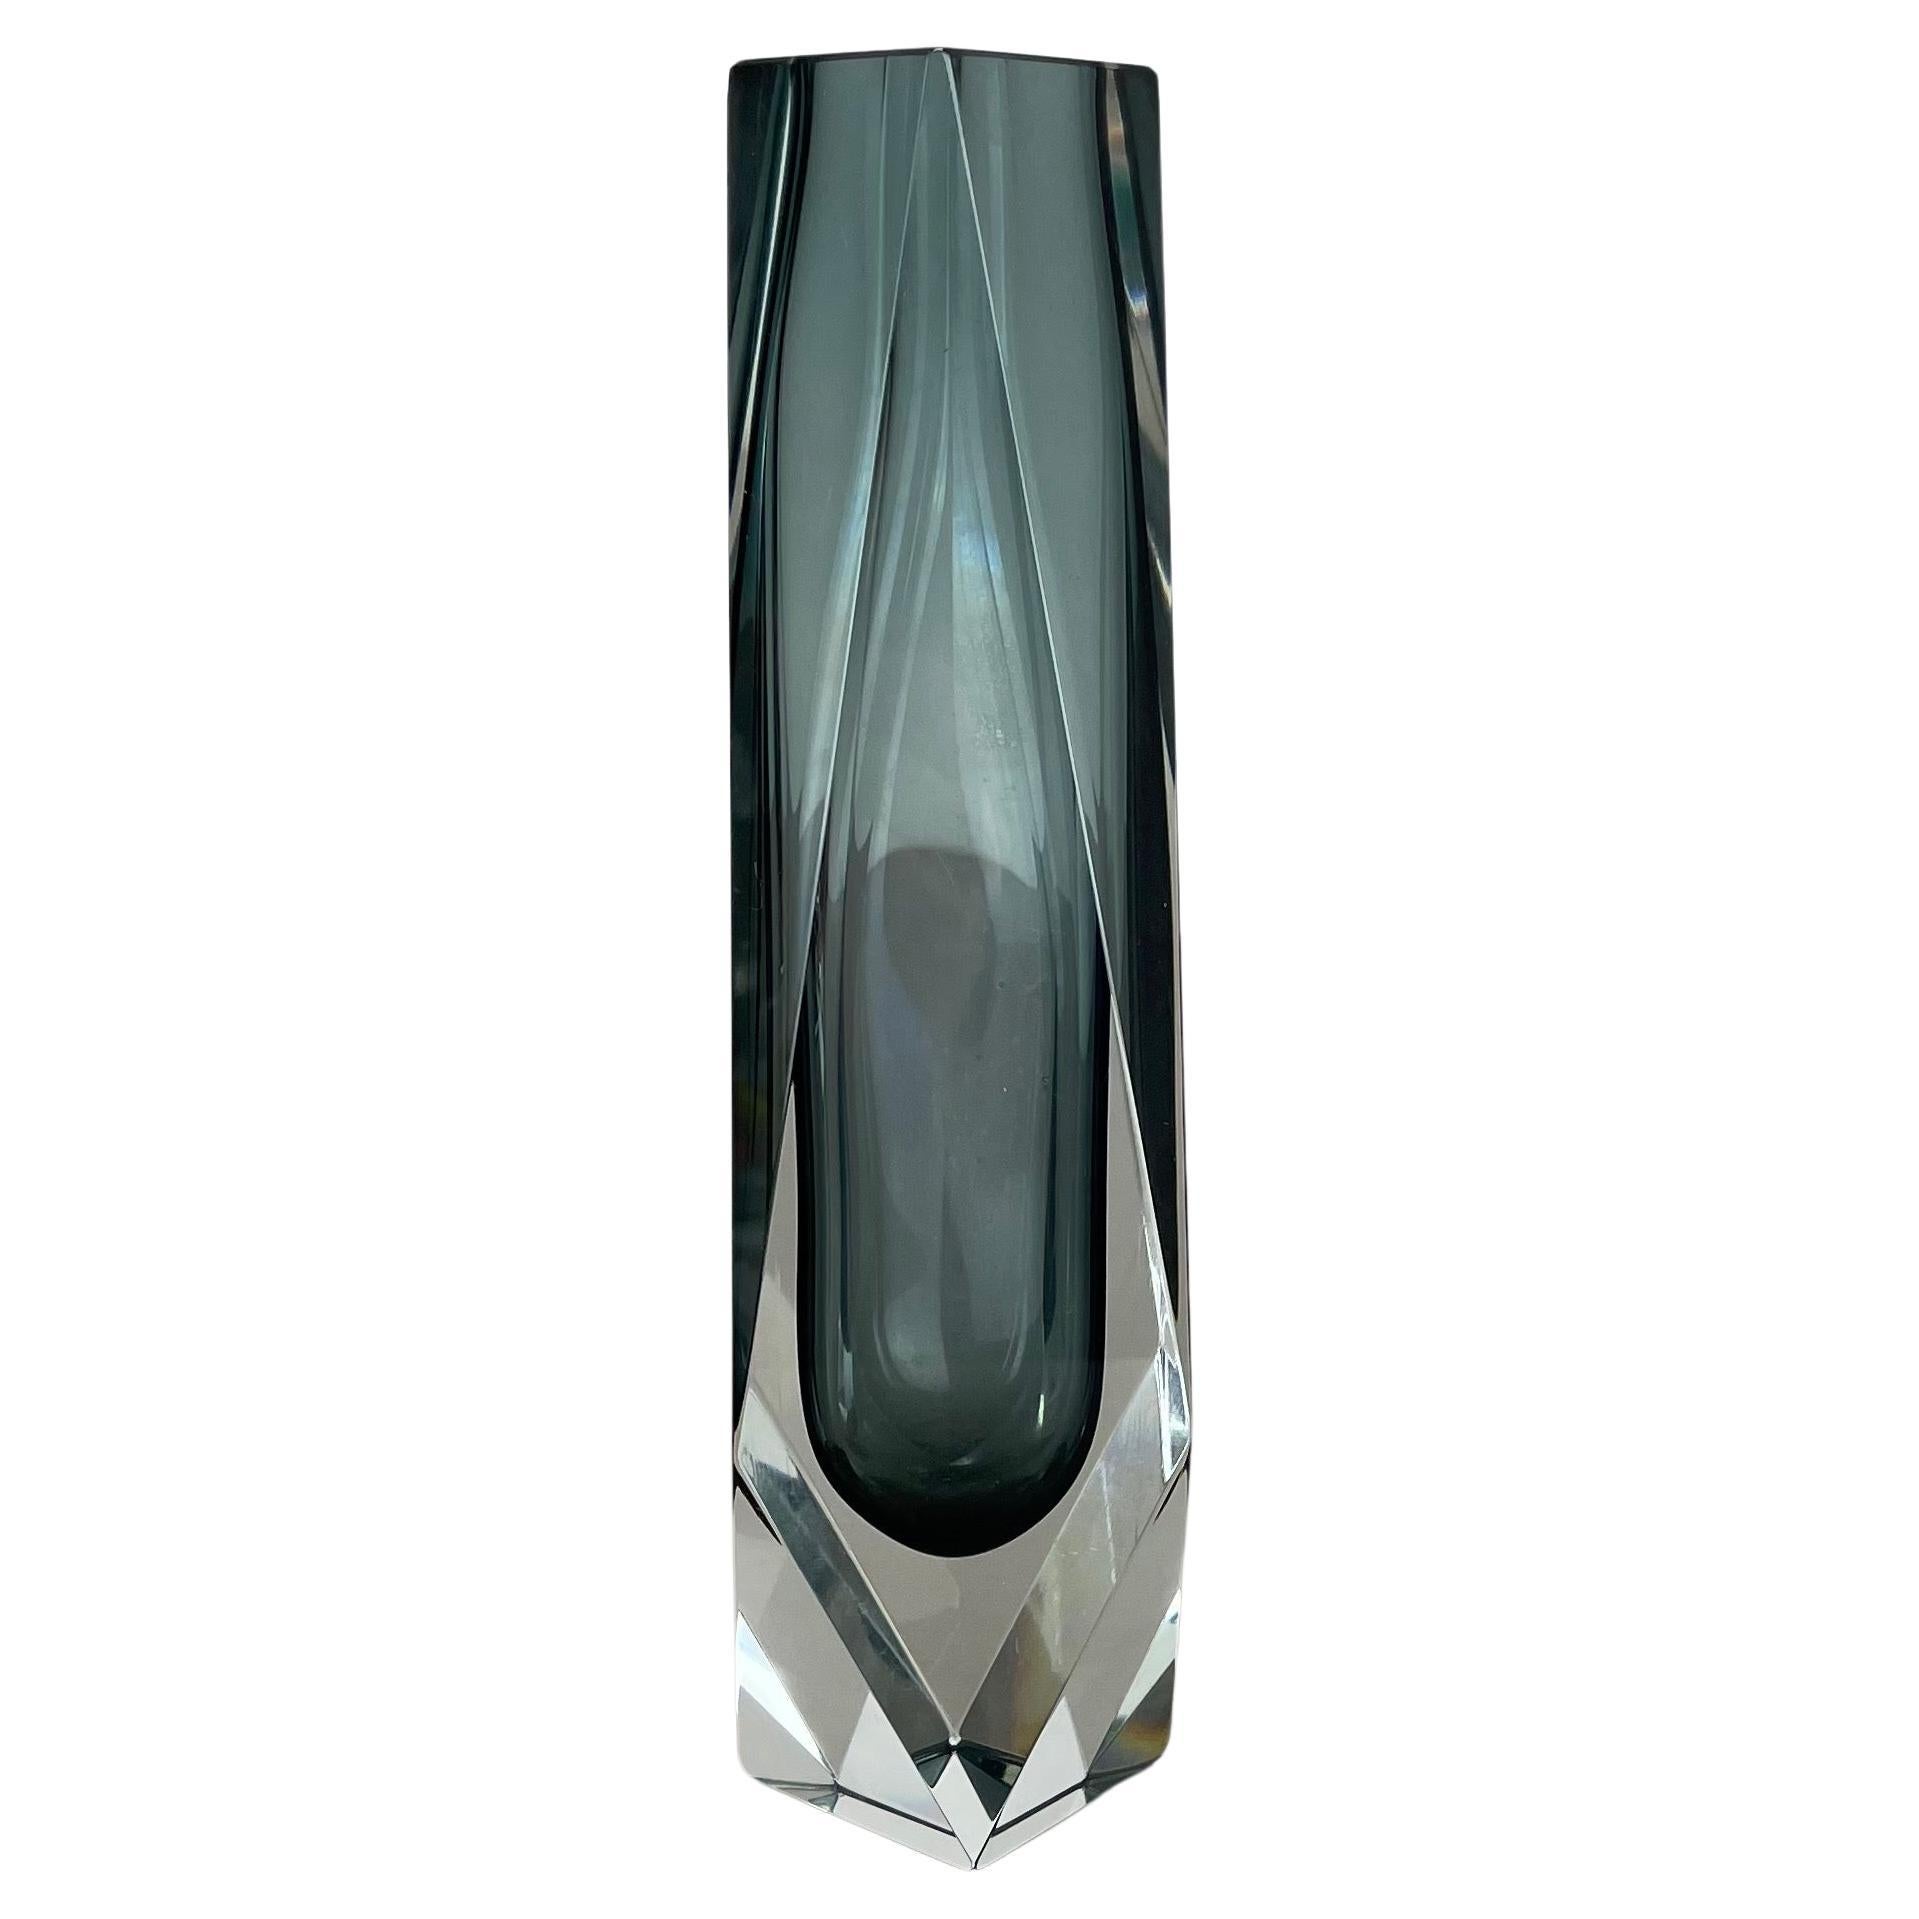 Large 25cm Grey Murano Glass Sommerso Vase by Flavio Poli Attributed, Italy 1970 For Sale